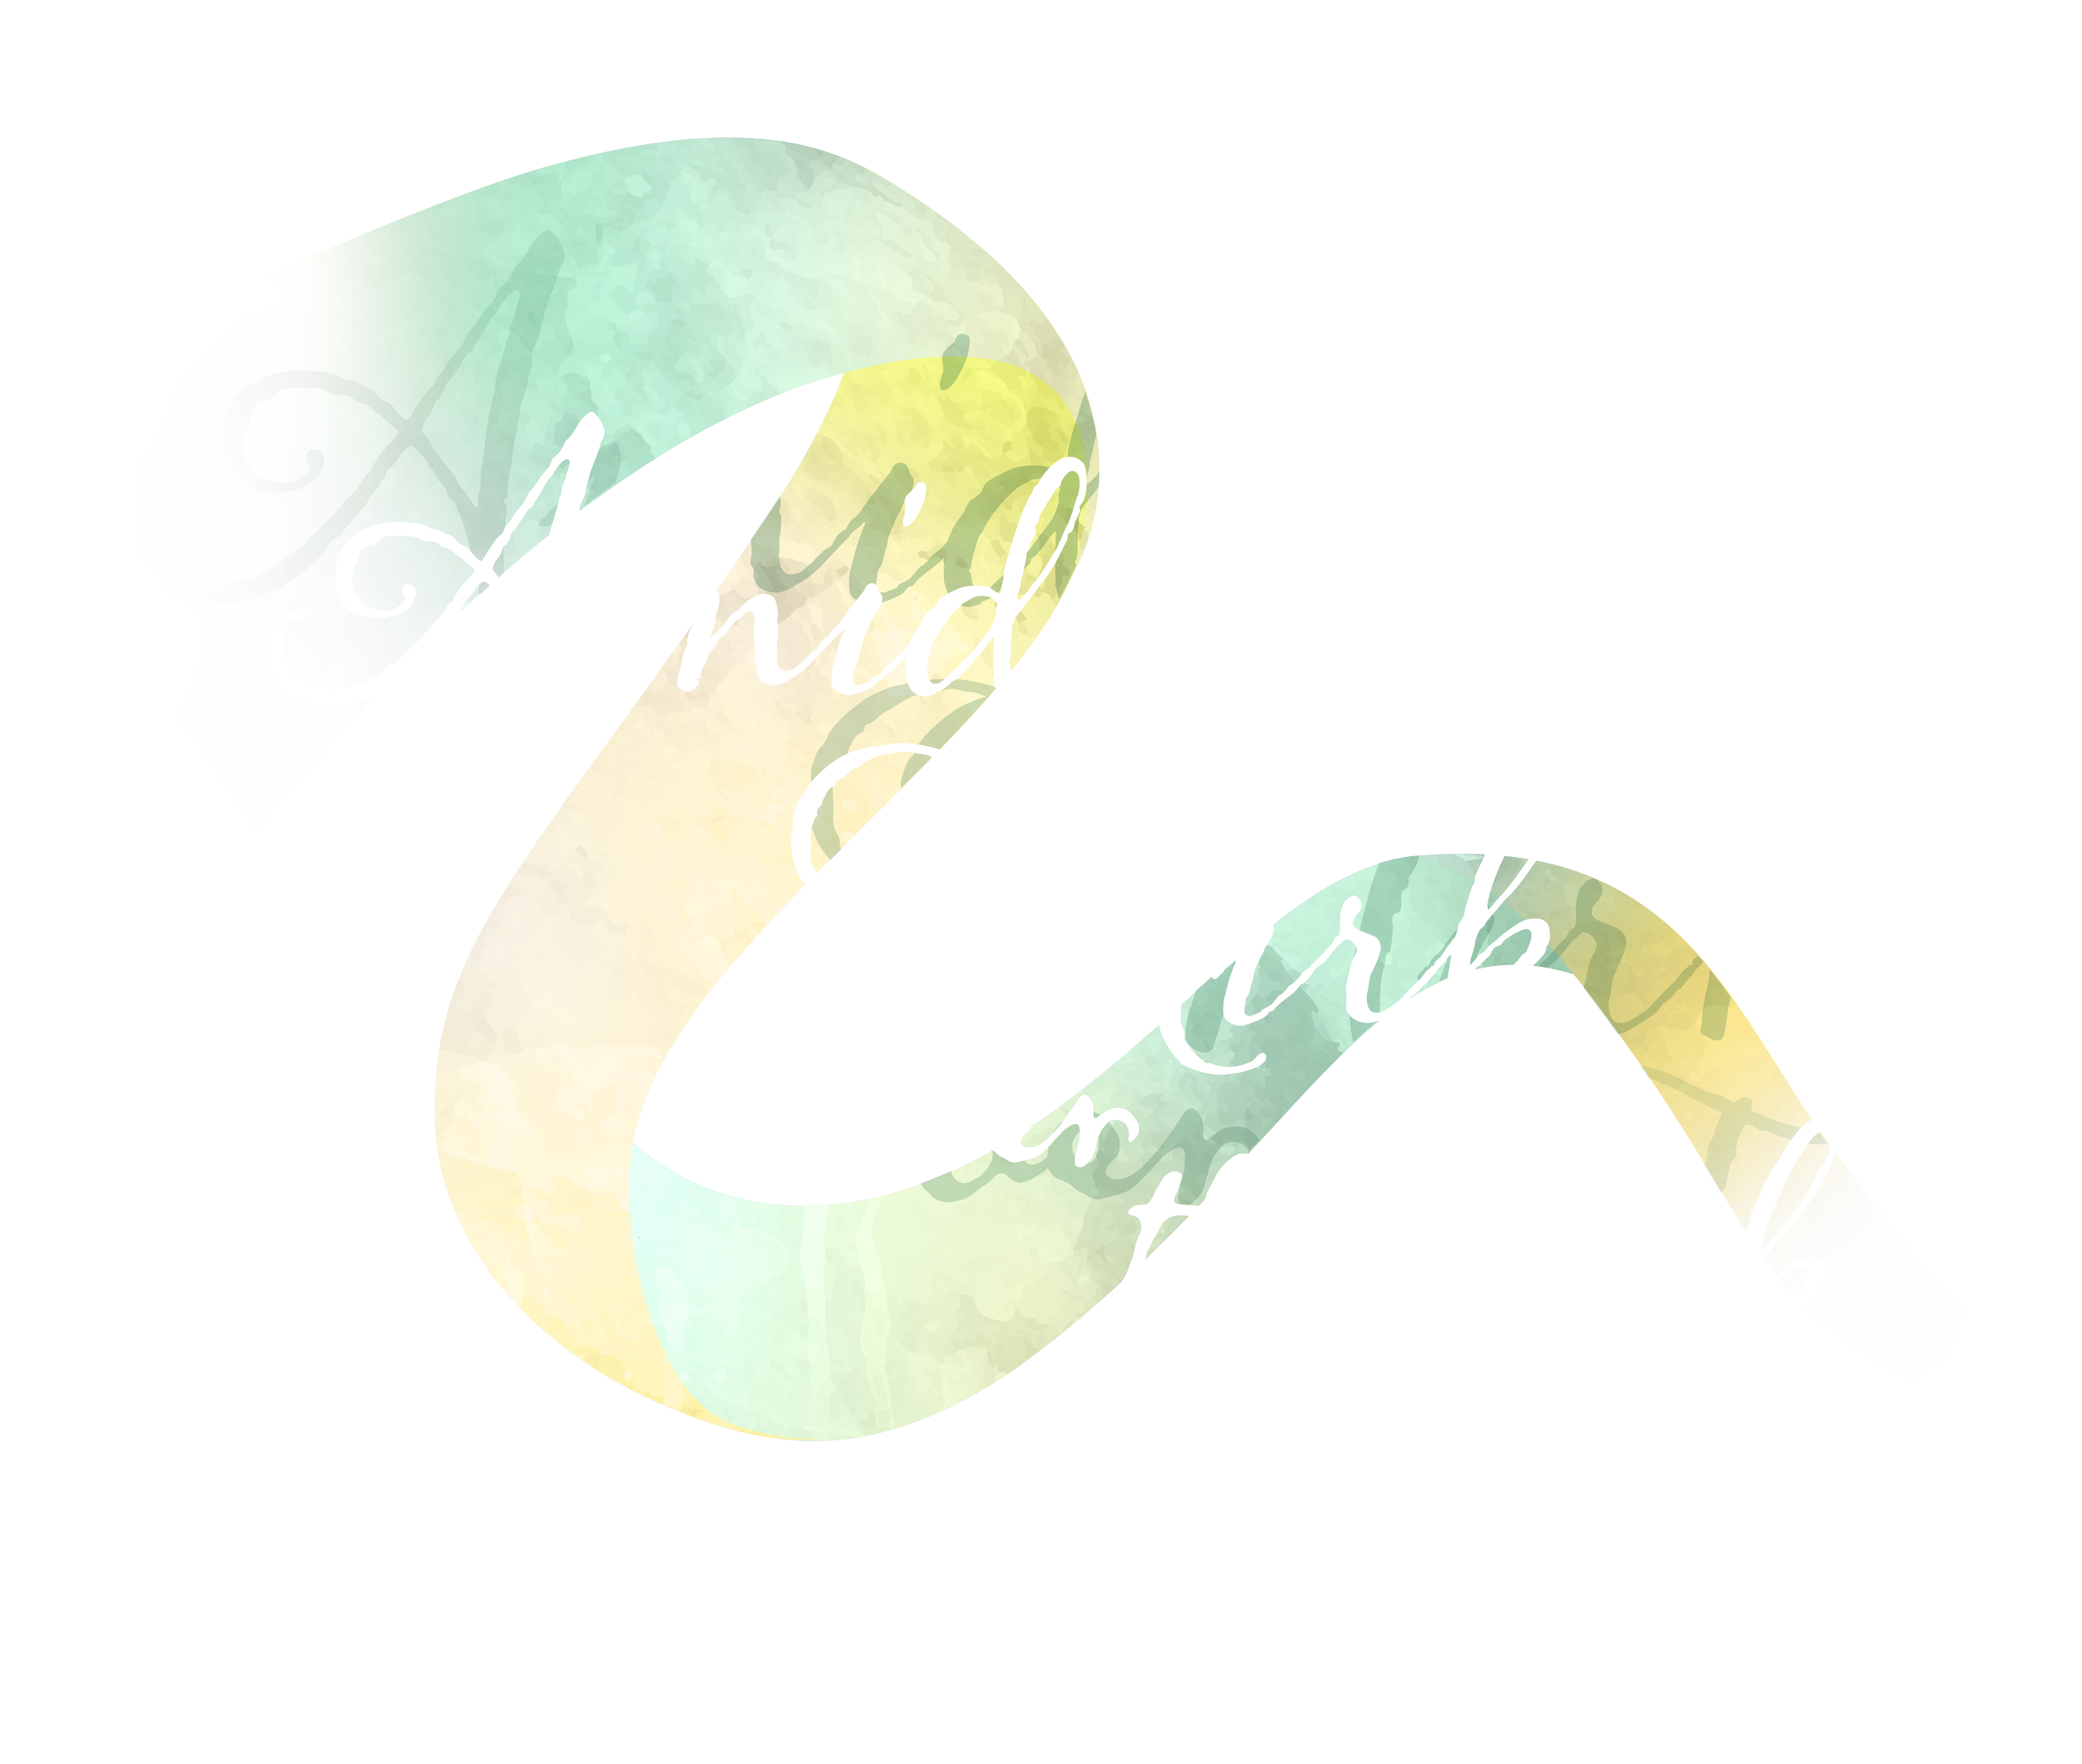 Amid the Mirk Over the Irk logo